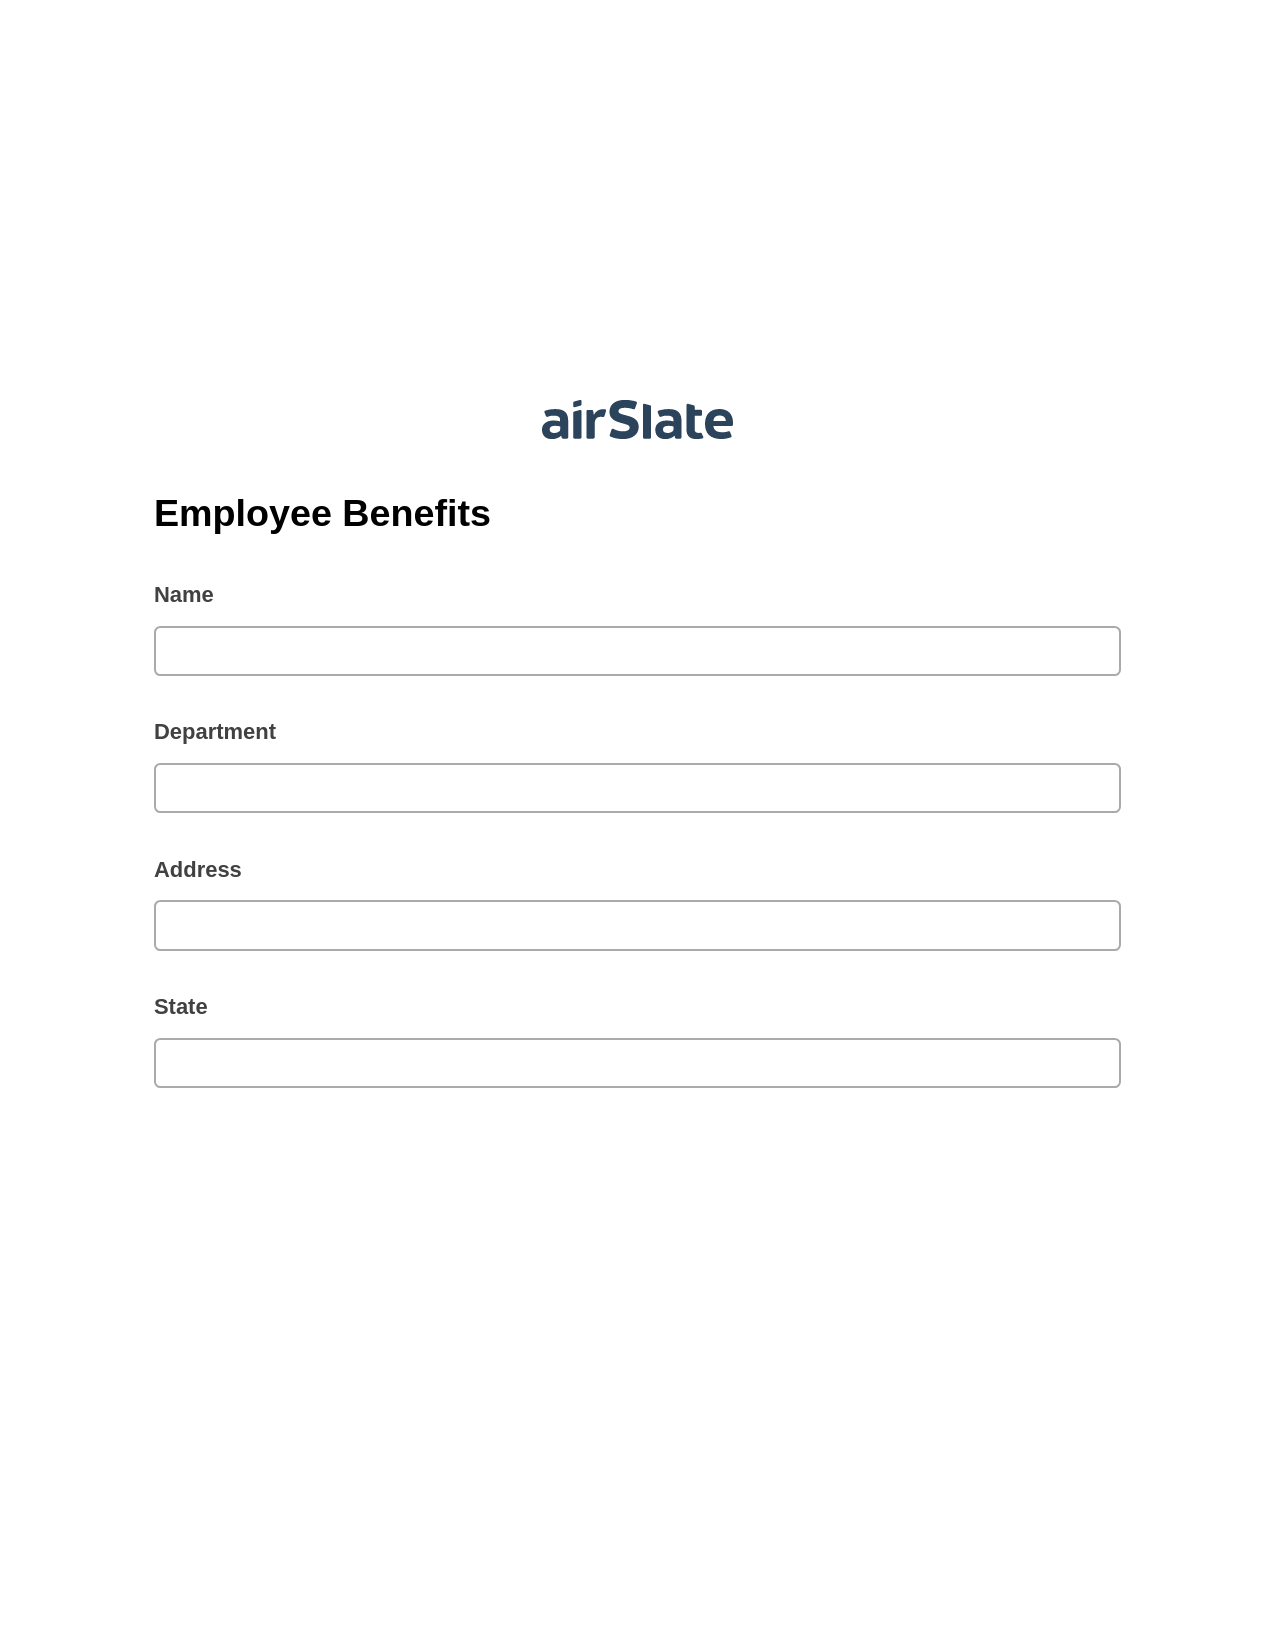 Employee Benefits Pre-fill from AirTable Bot, Document Hide Bot, Export to Formstack Documents Bot